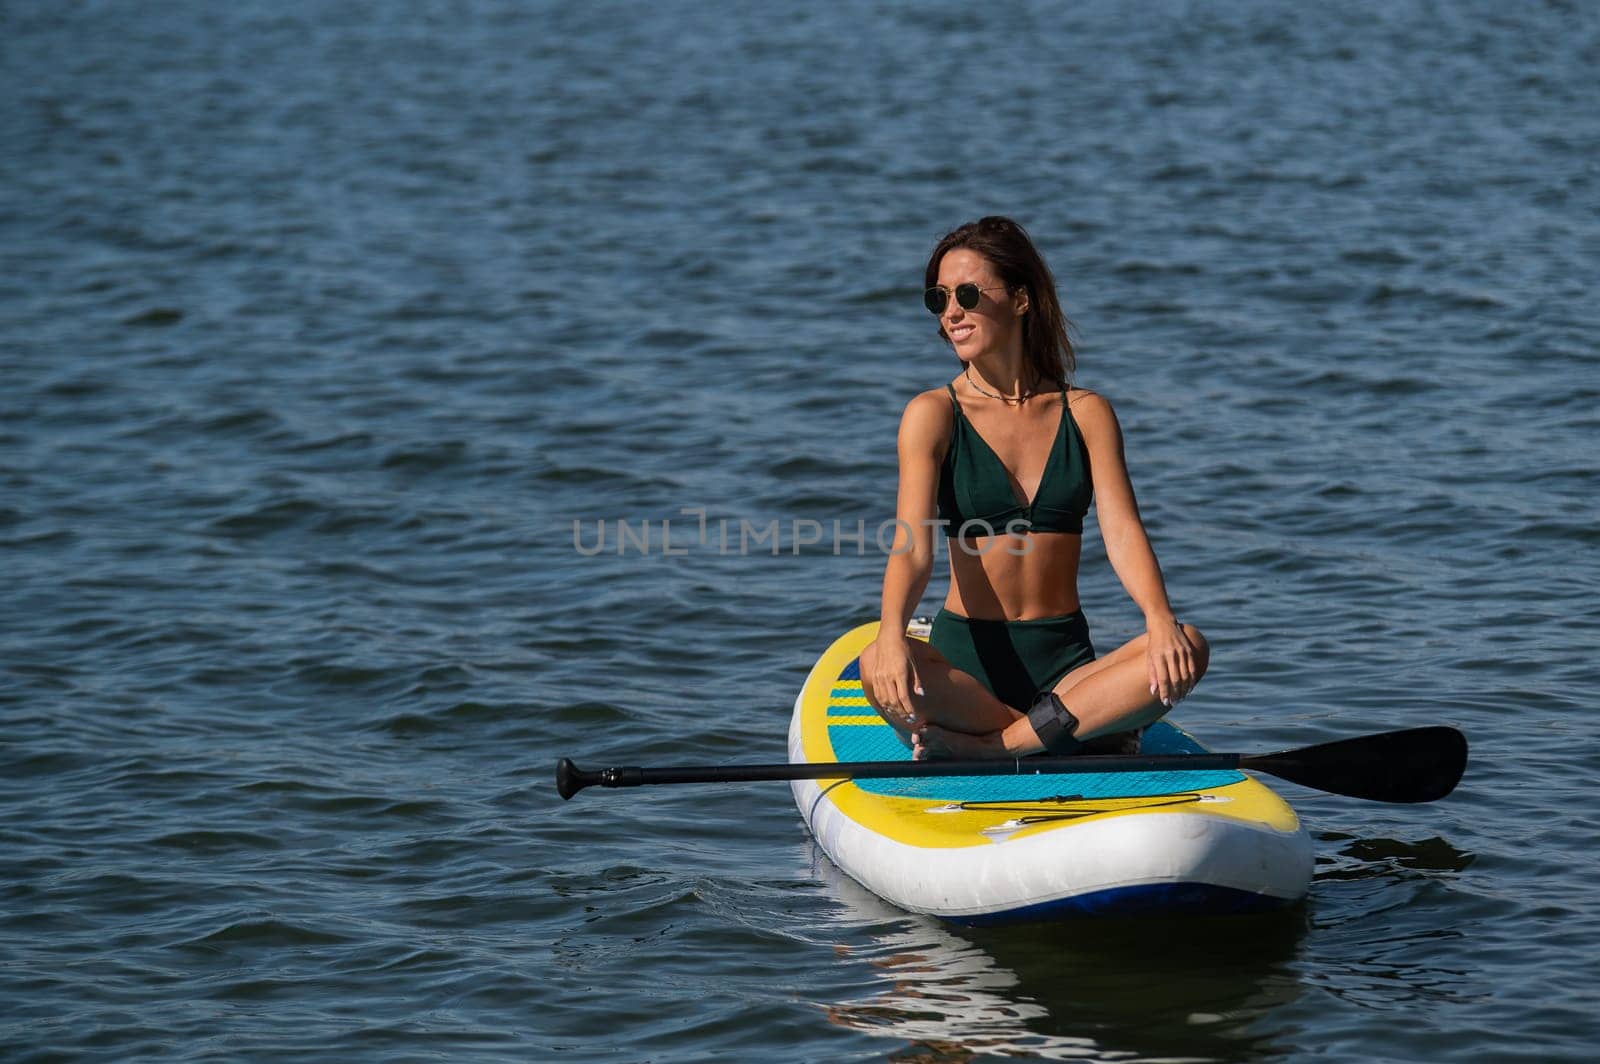 Caucasian woman sitting in lotus position on SUP board on the lake. Summer sports